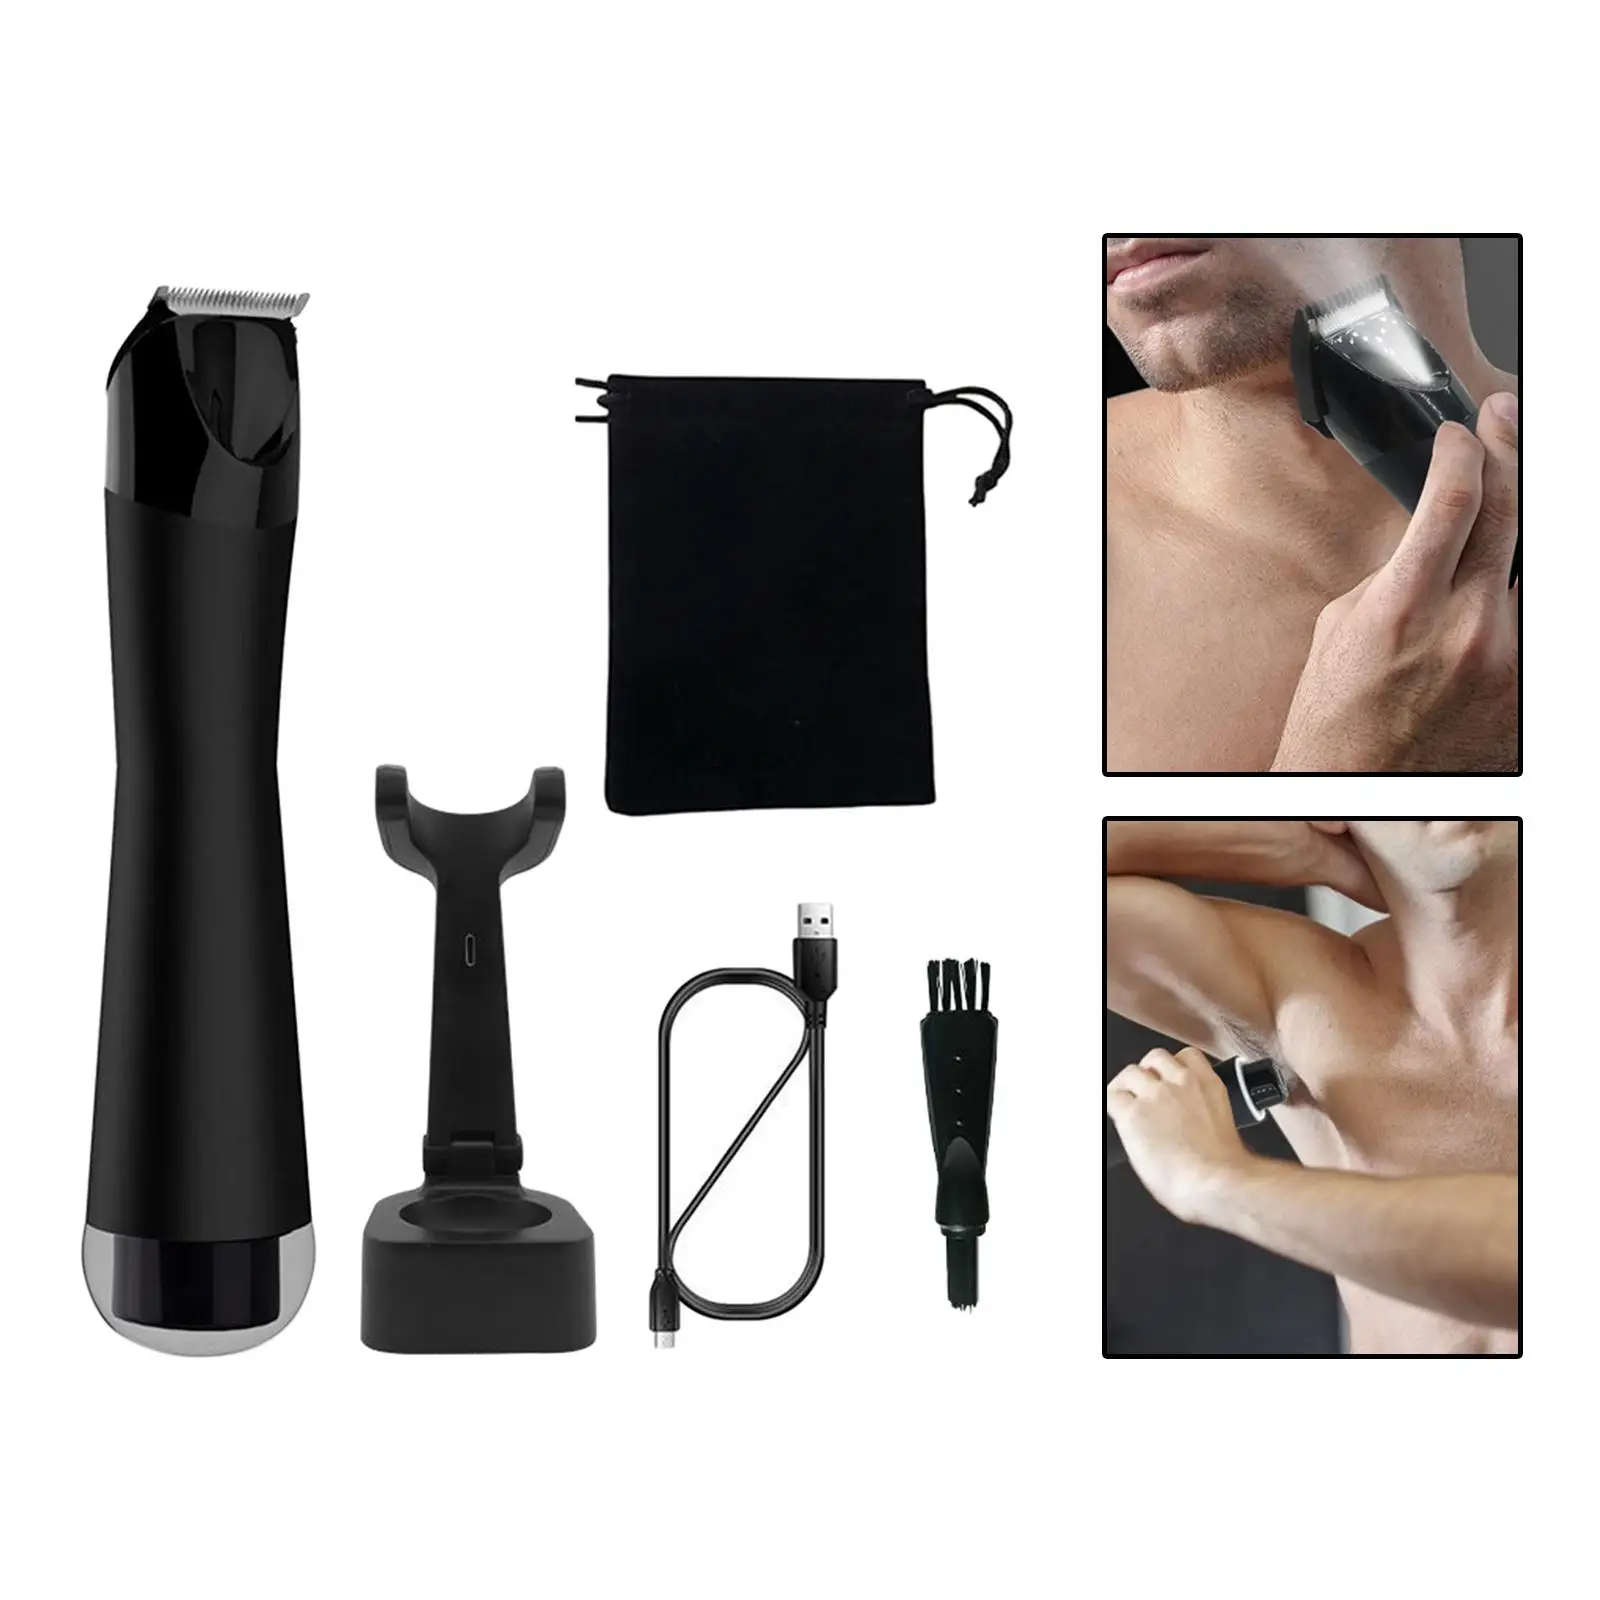 Double Head Electric Groin Hair Shaver for Men, USB Charging Detachable Professional